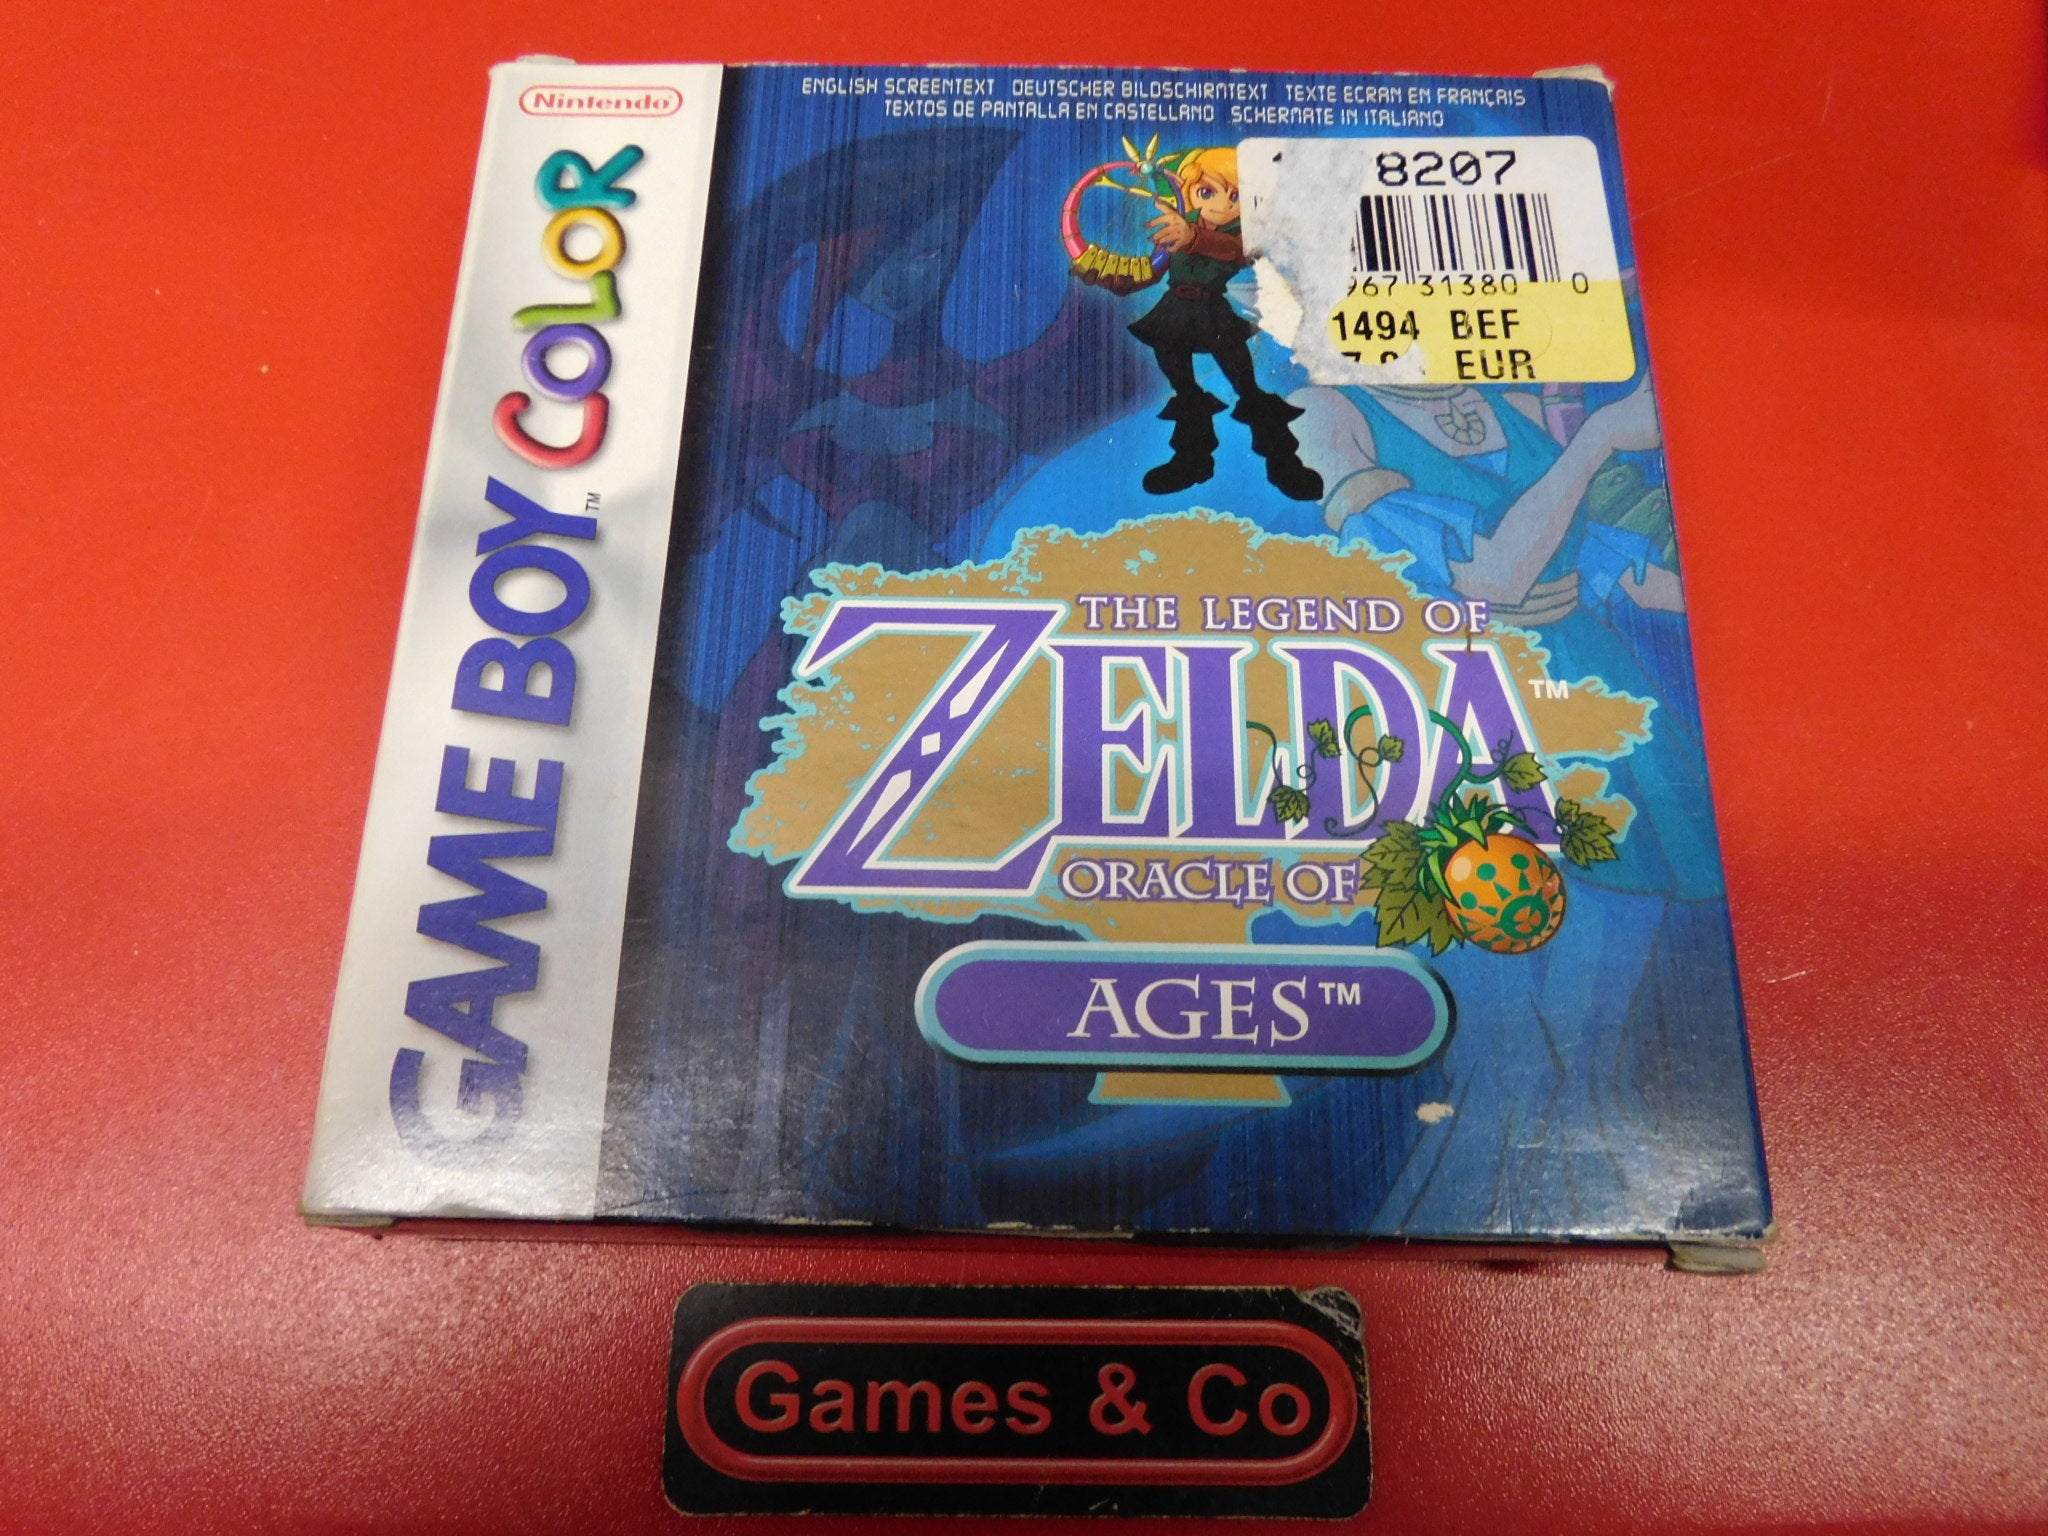 THE LEGEND OF ZELDA ORACLE OF AGES